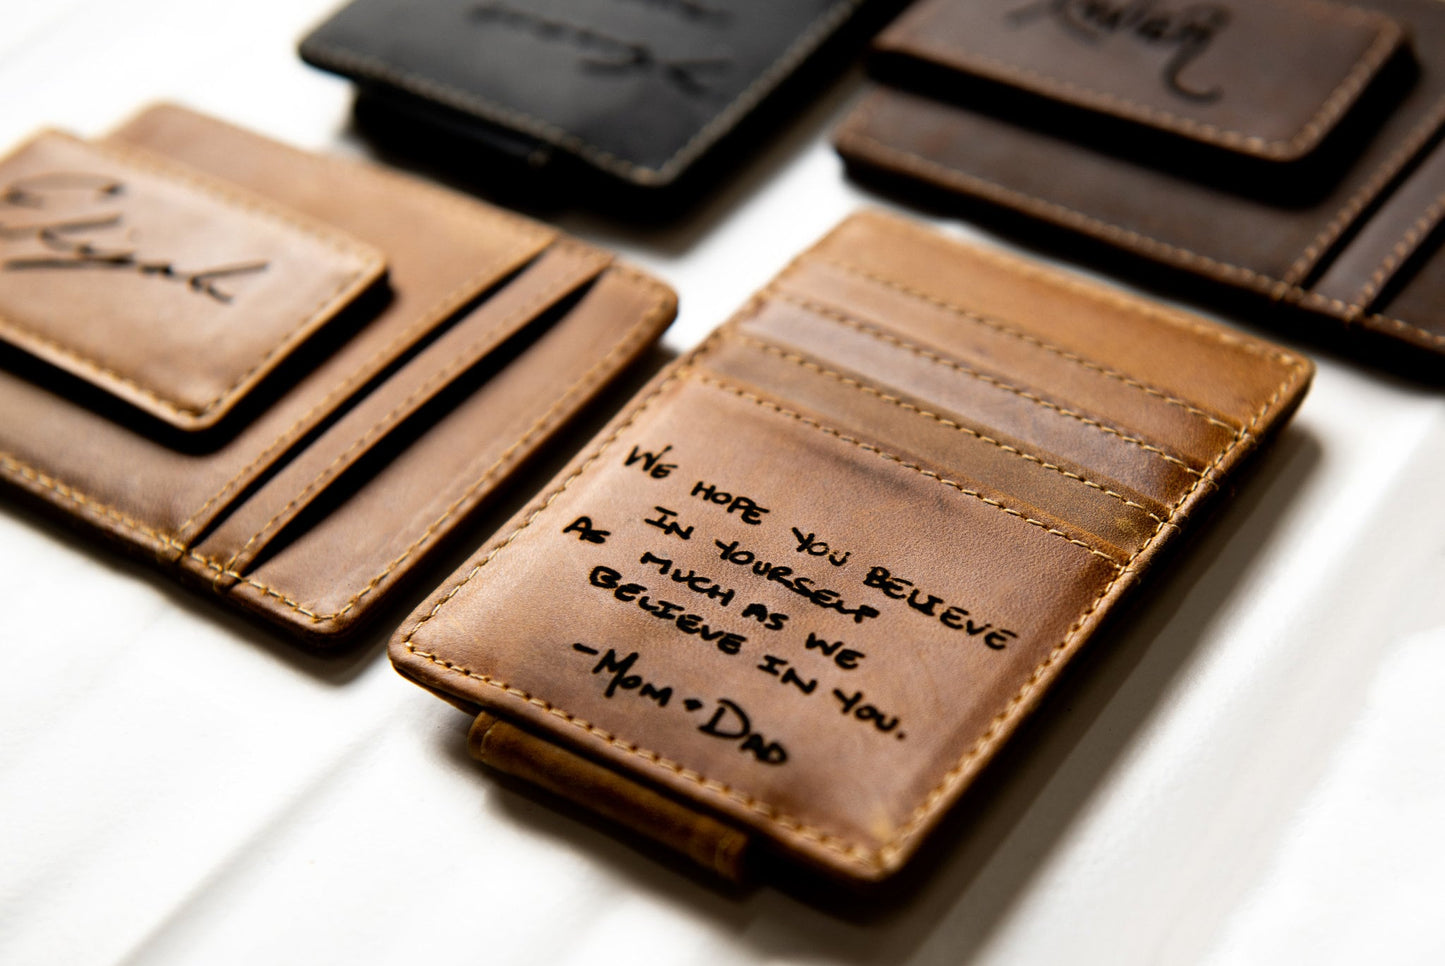 The Sanibel Personalized Handwriting Leather Magnetic Money Clip